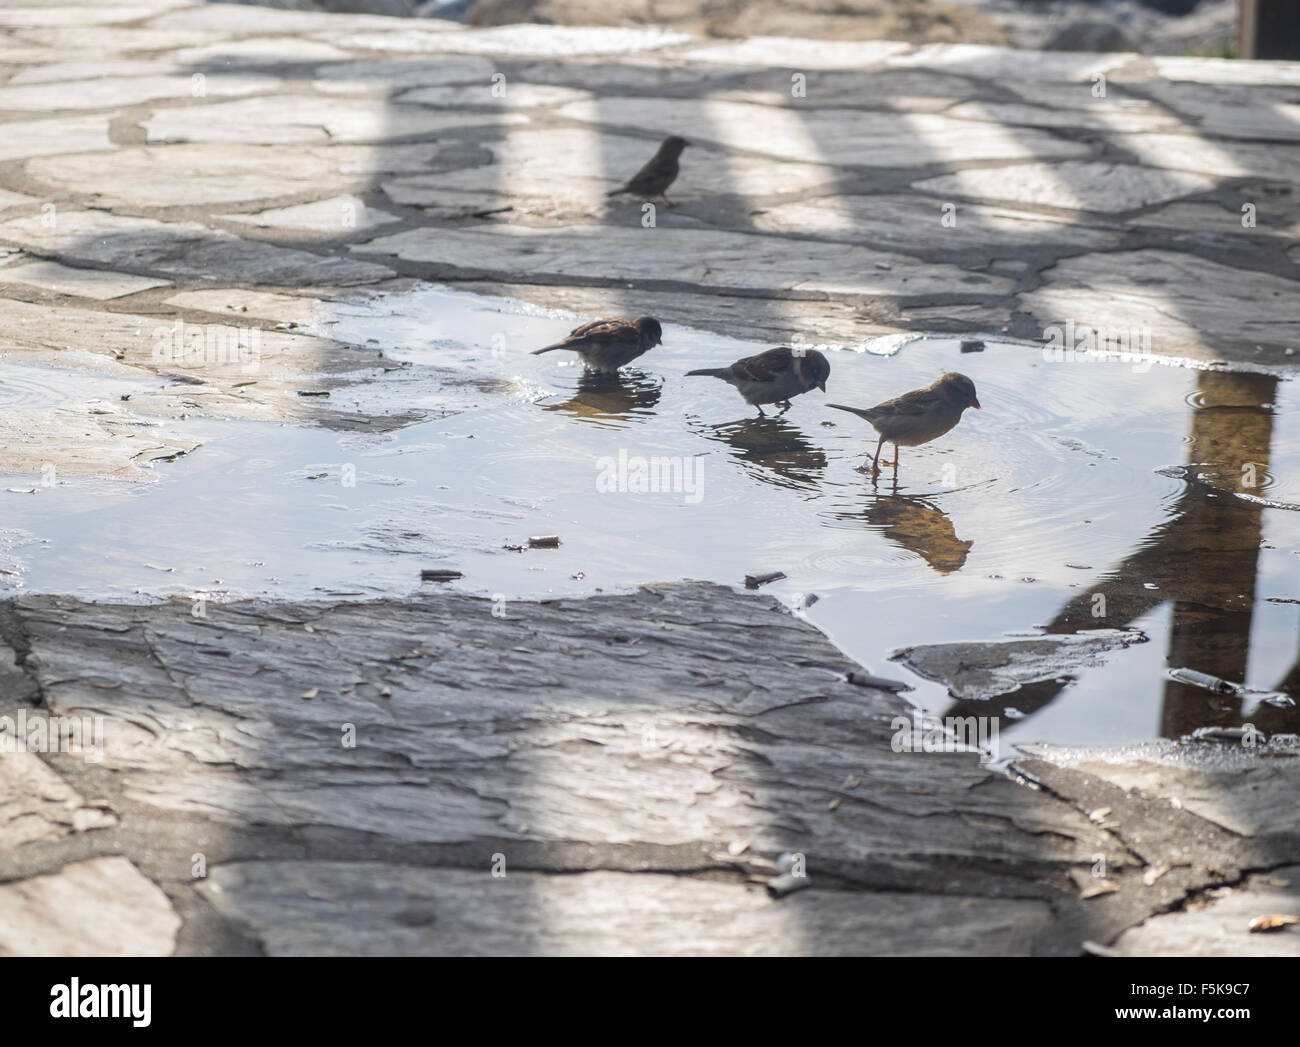 Sparrows bathing in a puddle Stock Photo